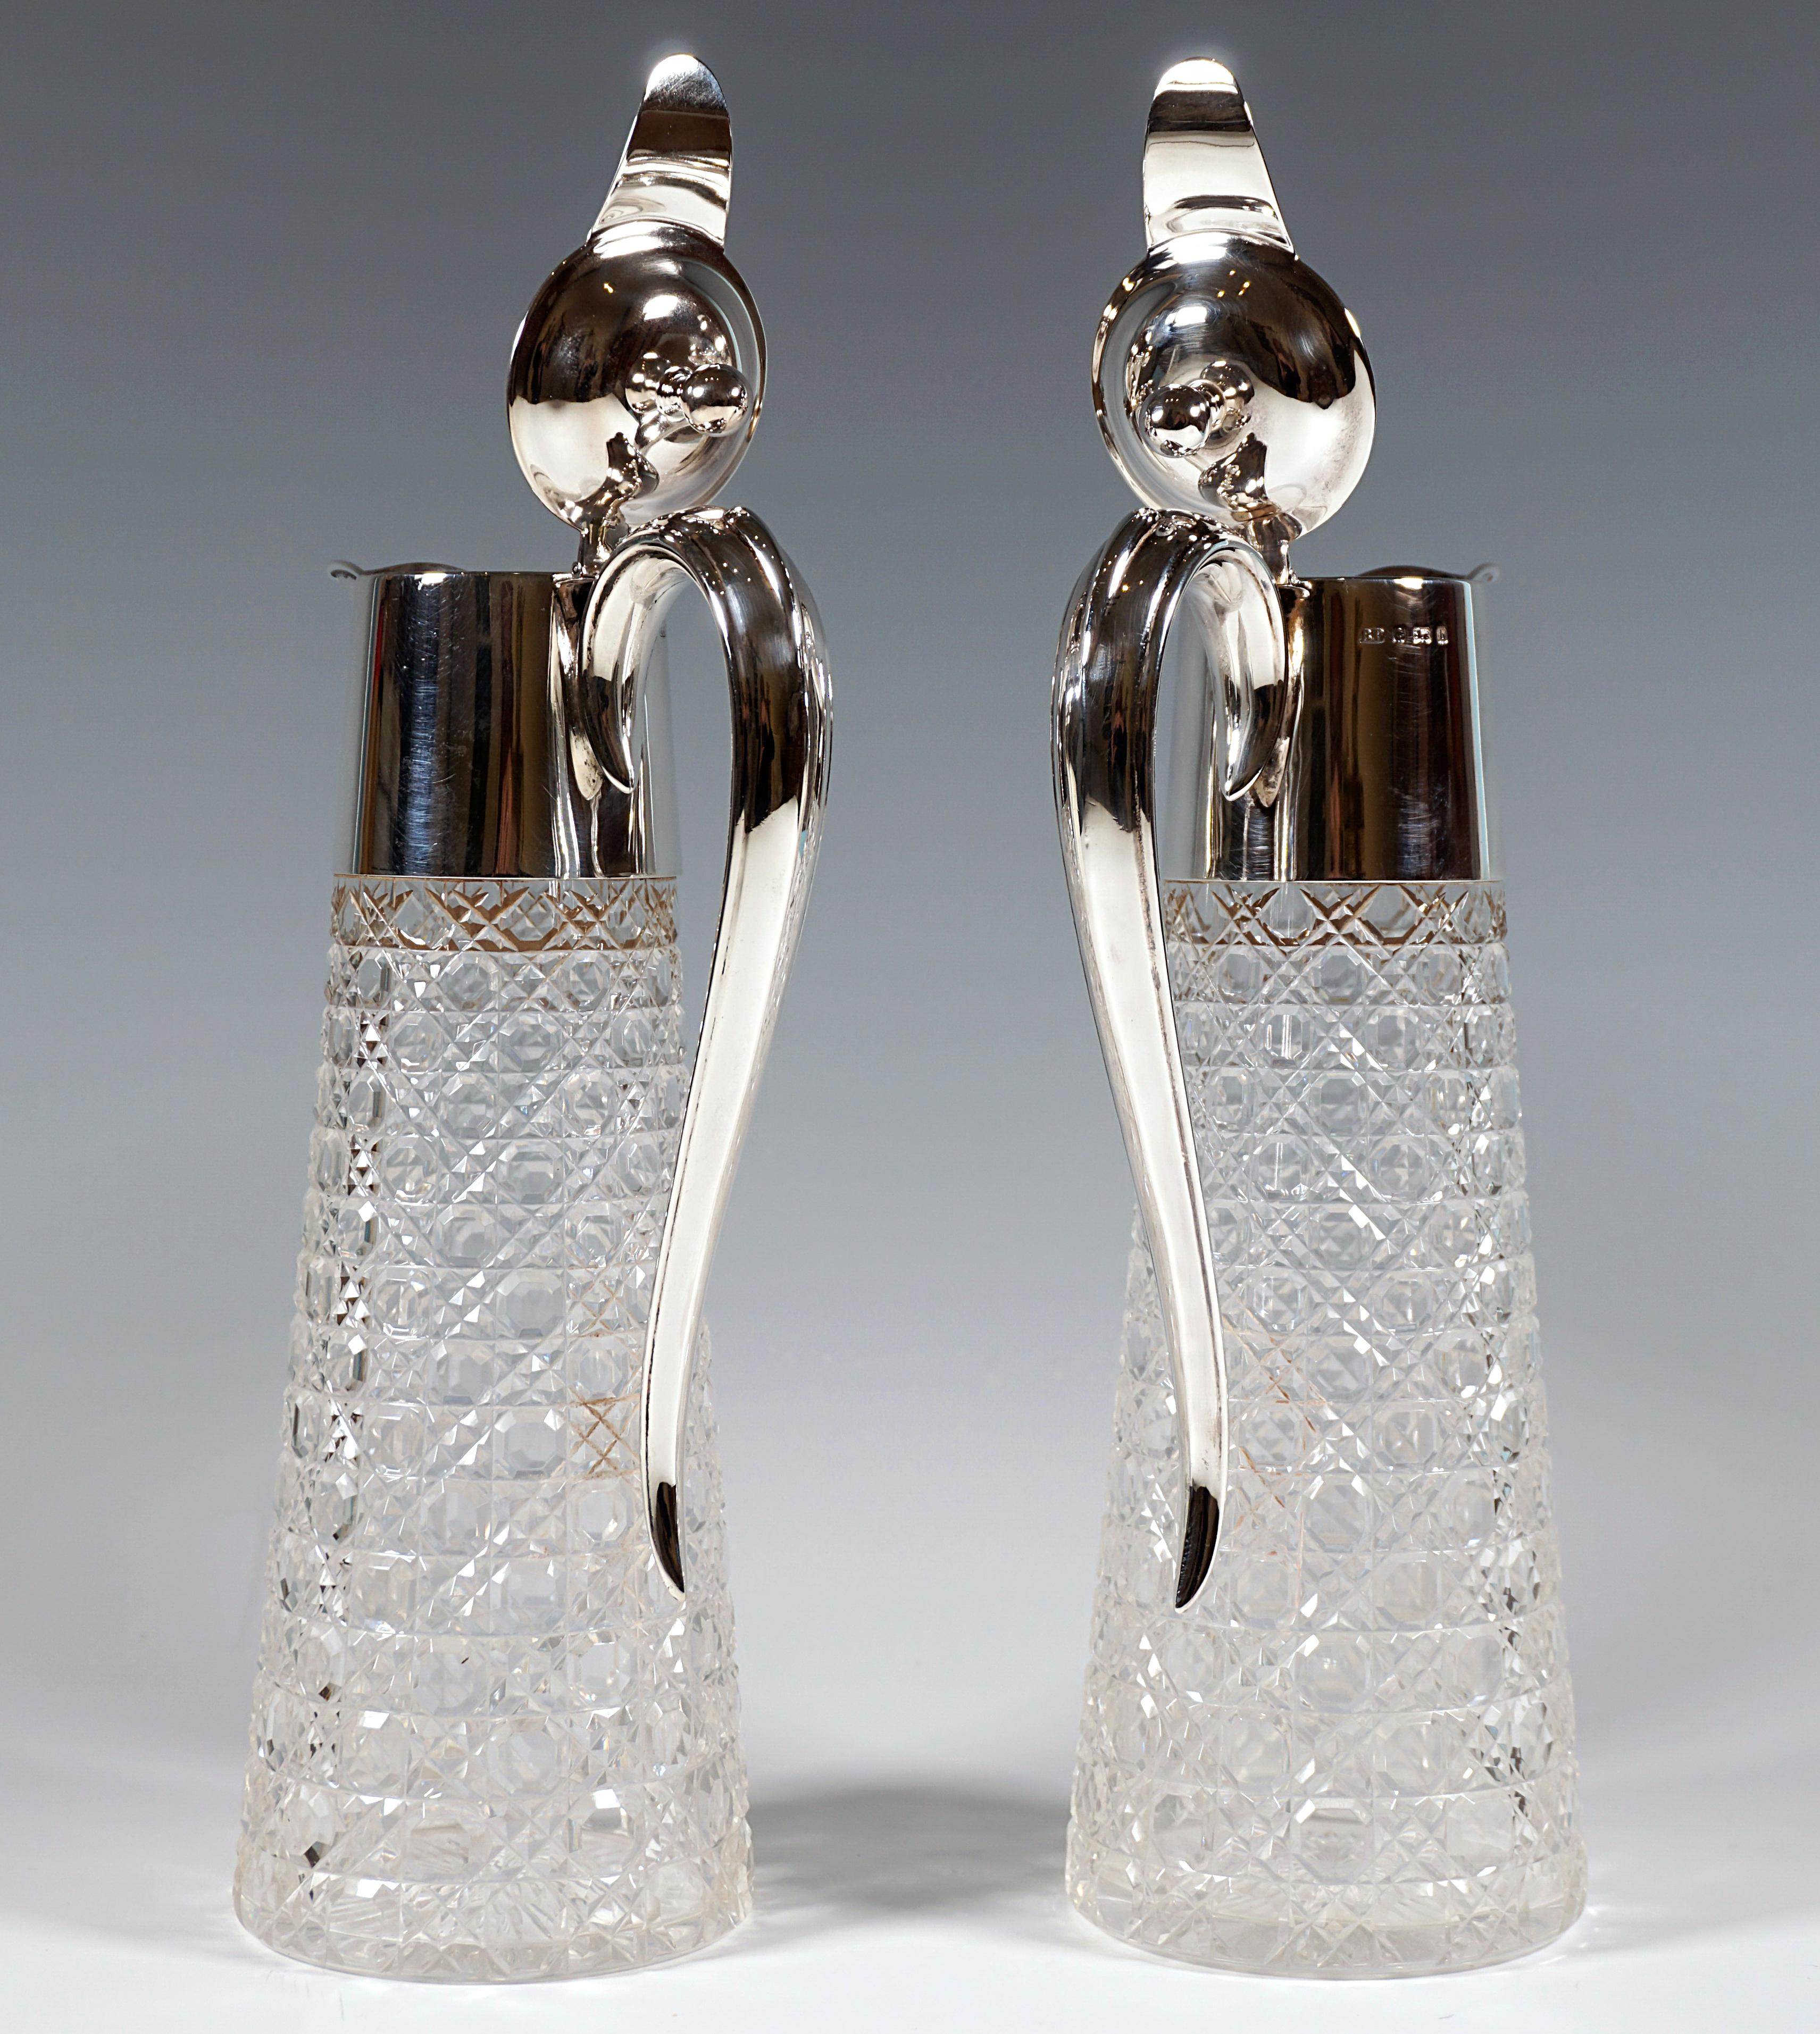 Hand-Crafted Pair Of Art Nouveau Carafes With Silver Mount by Barker Brothers Birmingham 1901 For Sale